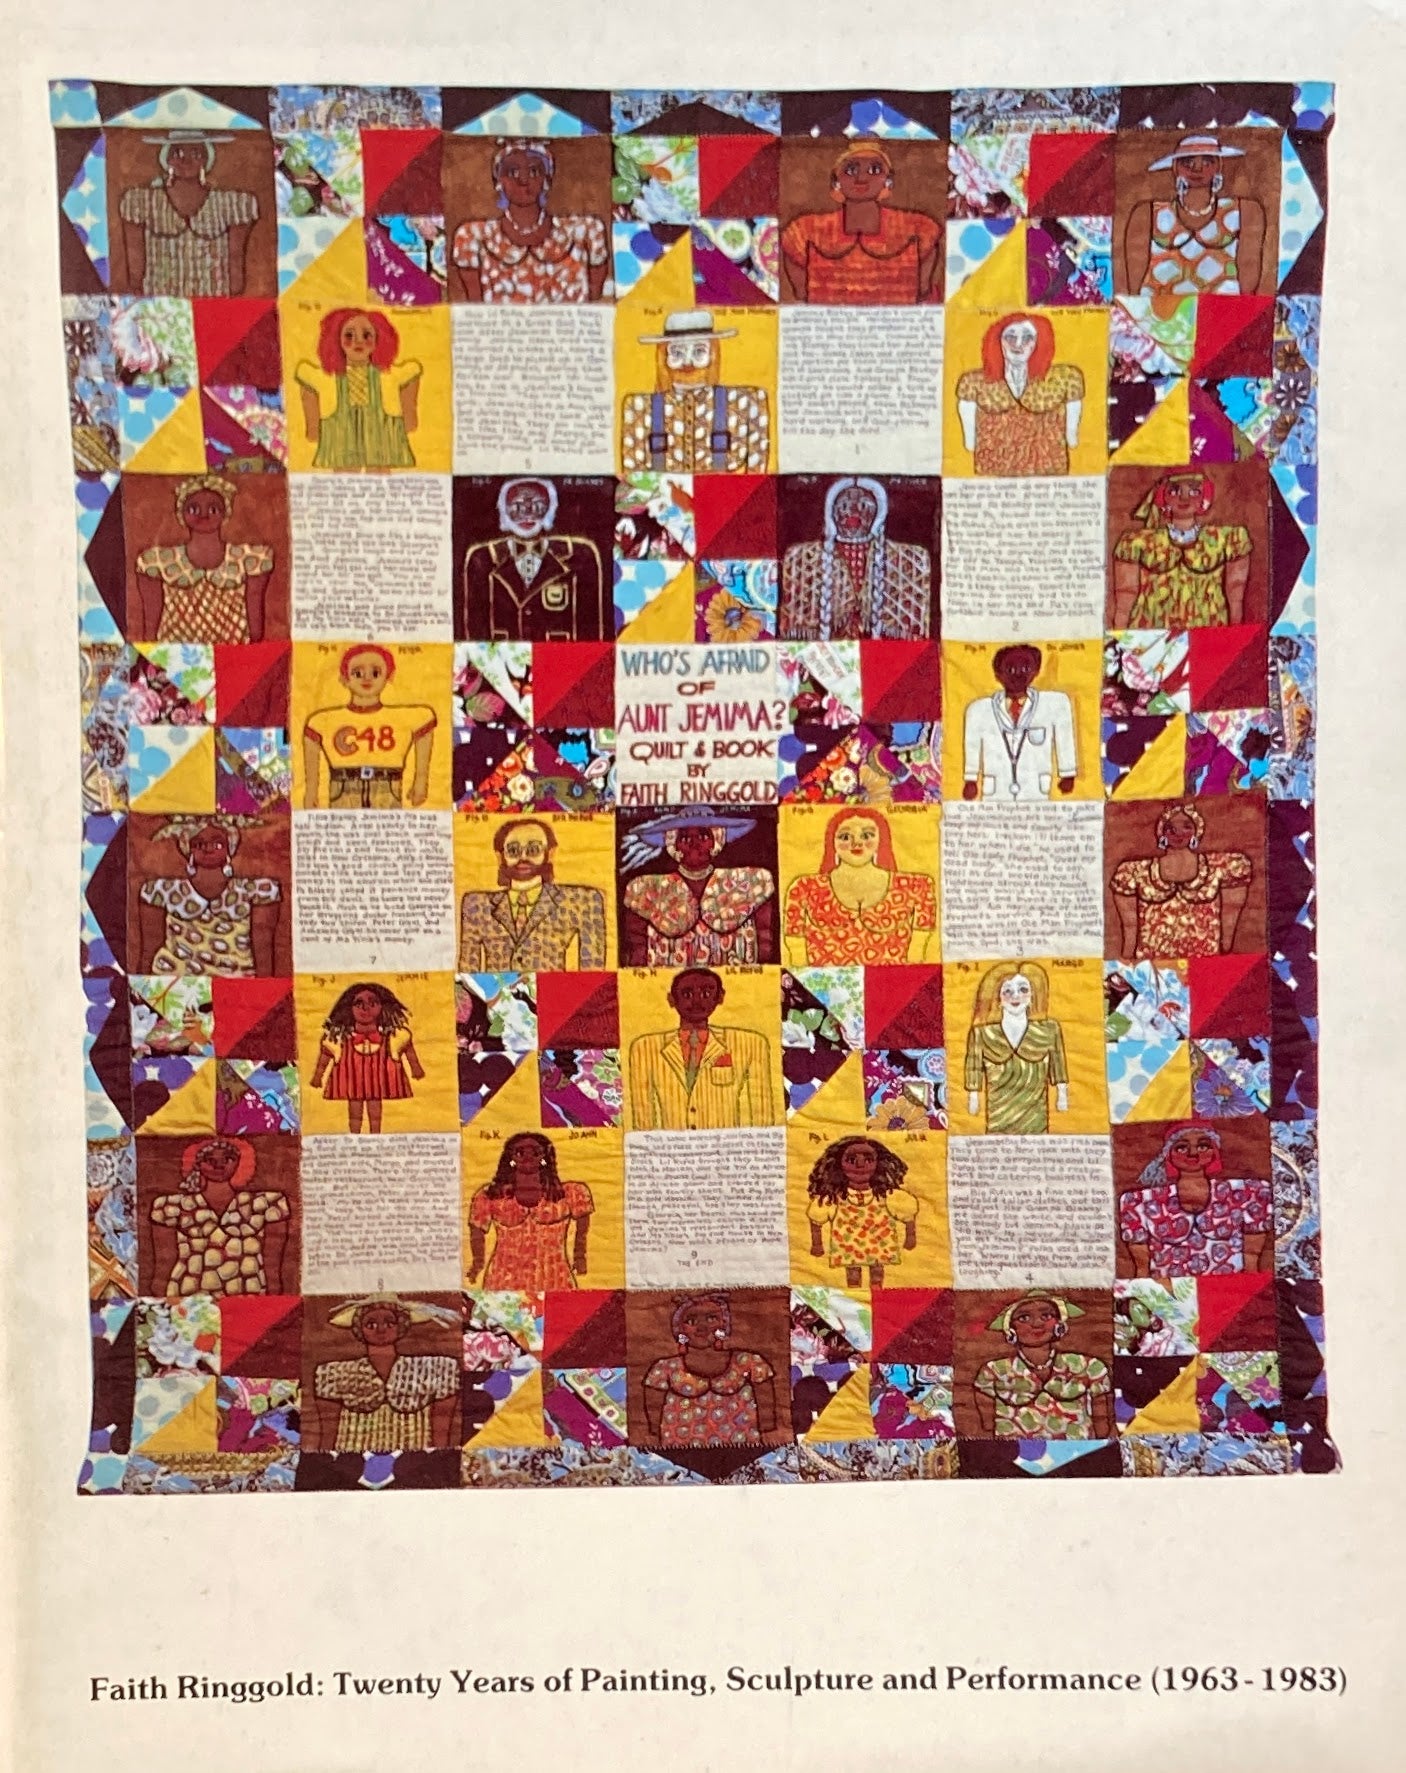 Faith Ringgold　Twenty Years of Paintings, Sculpture and Performance　1963-1983　フェイス・リングゴールド